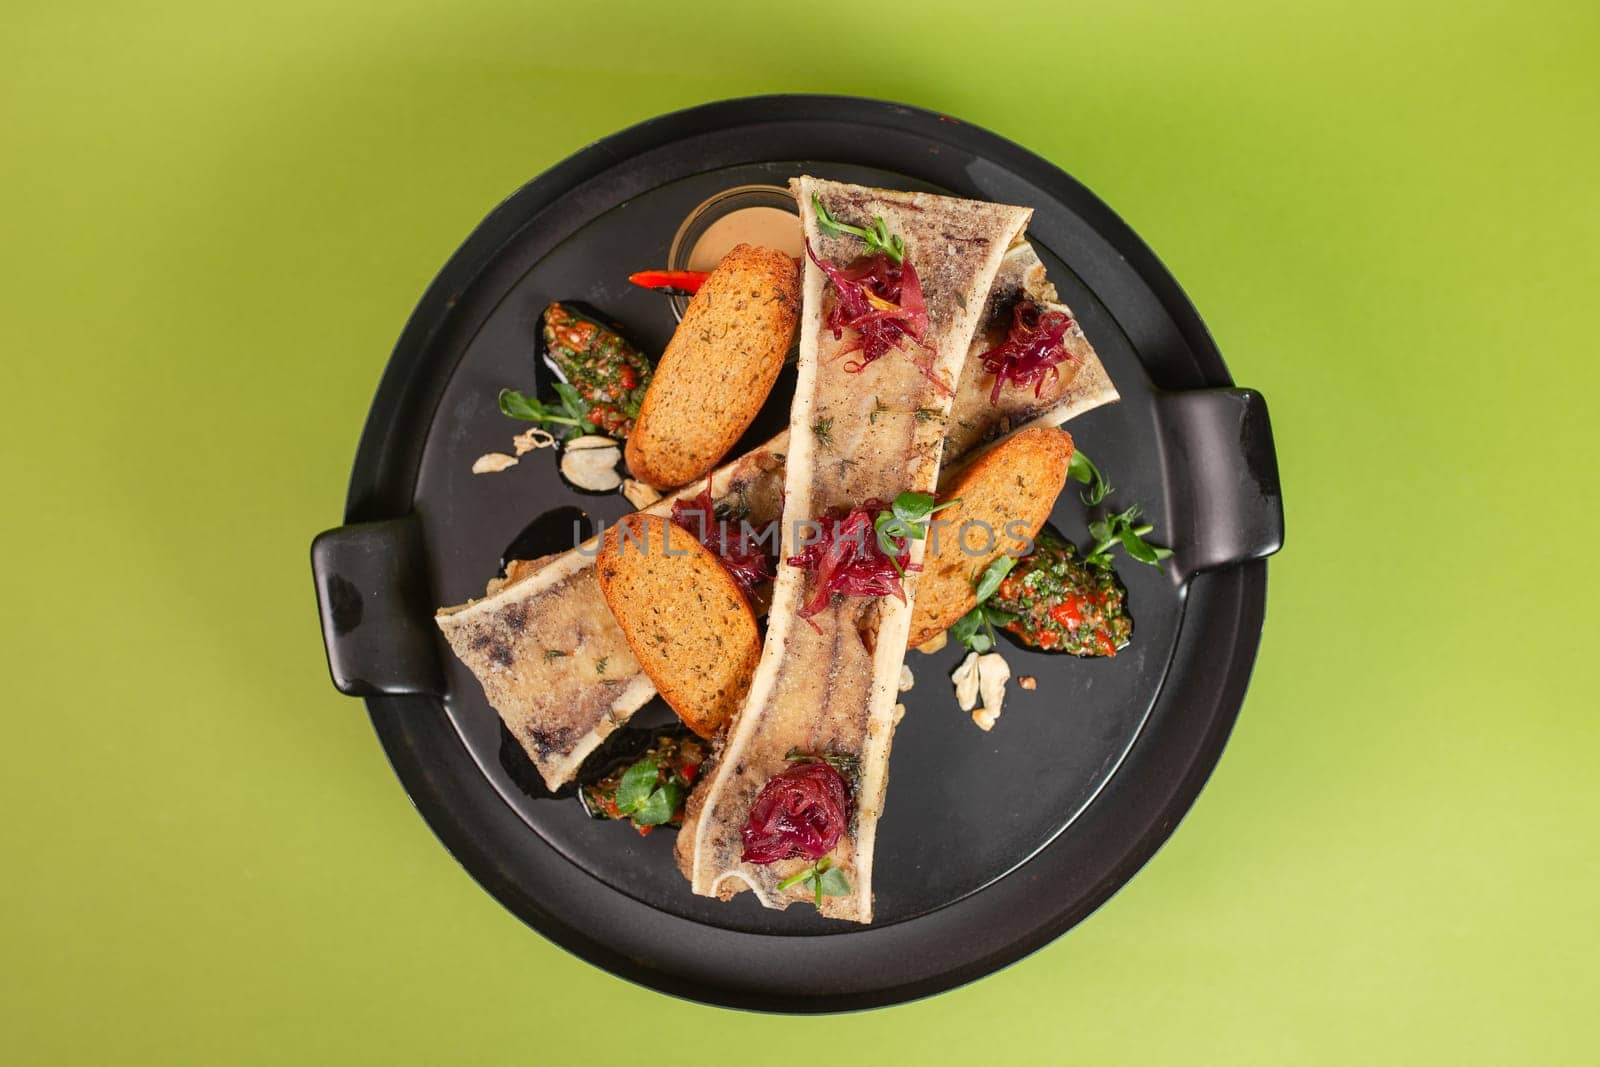 Top view of beef bone marrow on a black plate with toast and greens on a green background. The delicacy is on the menu. by Pukhovskiy